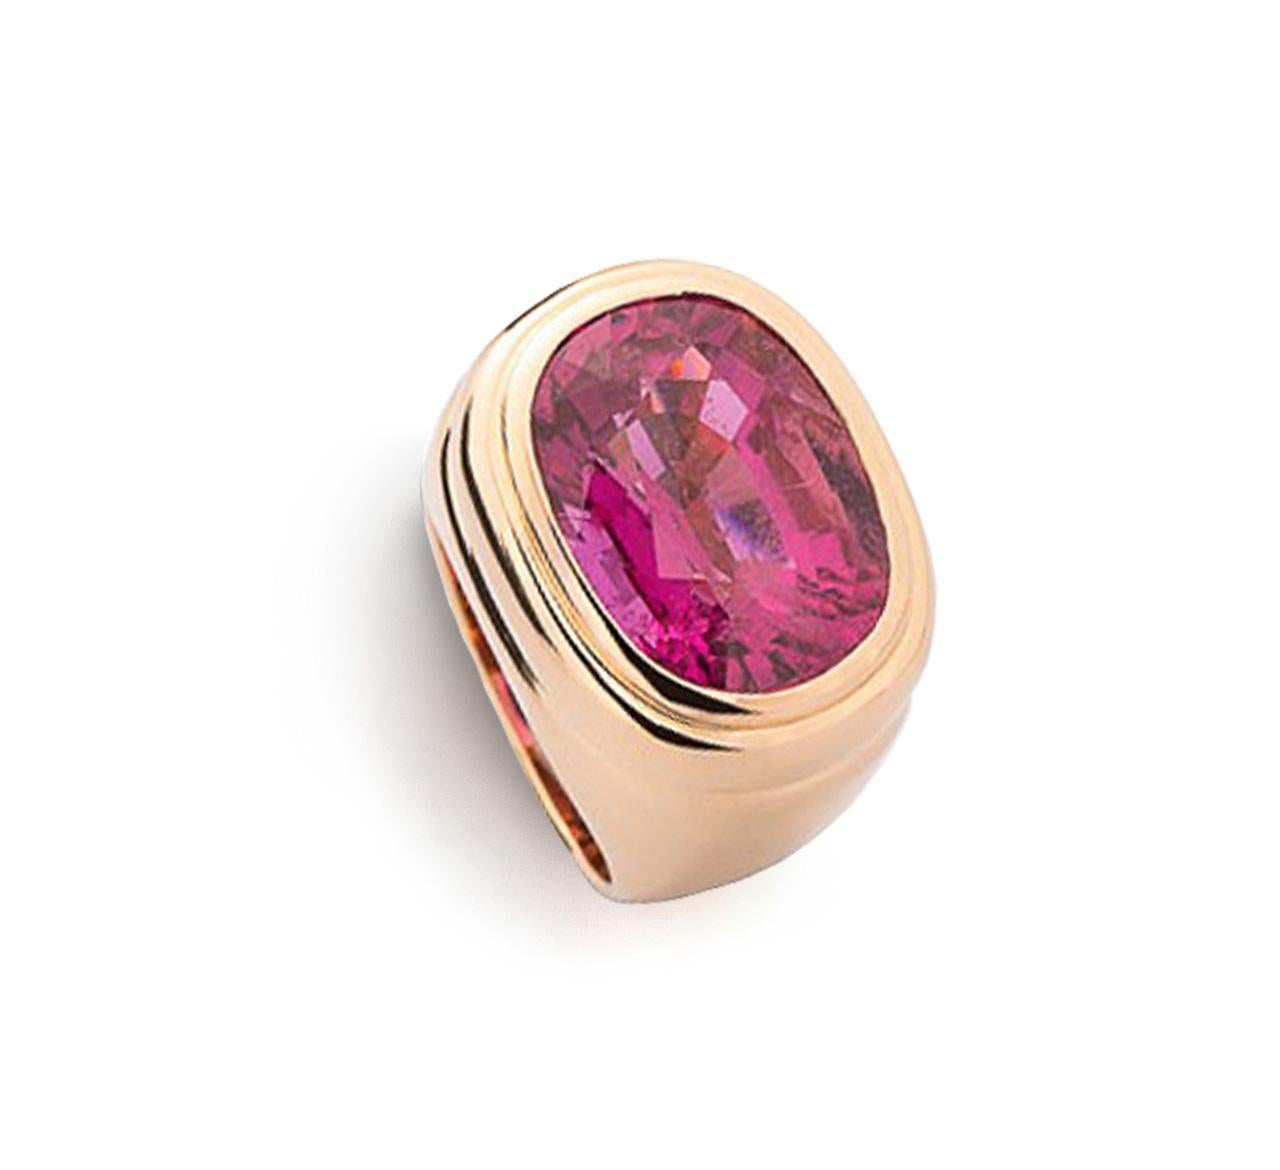 Are you ready to wear this beautiful 18k rosé gold ring with a vibrant pink tourmaline 13.08 ct designed by Colleen B. Rosenblat? 
Ring size: 55
